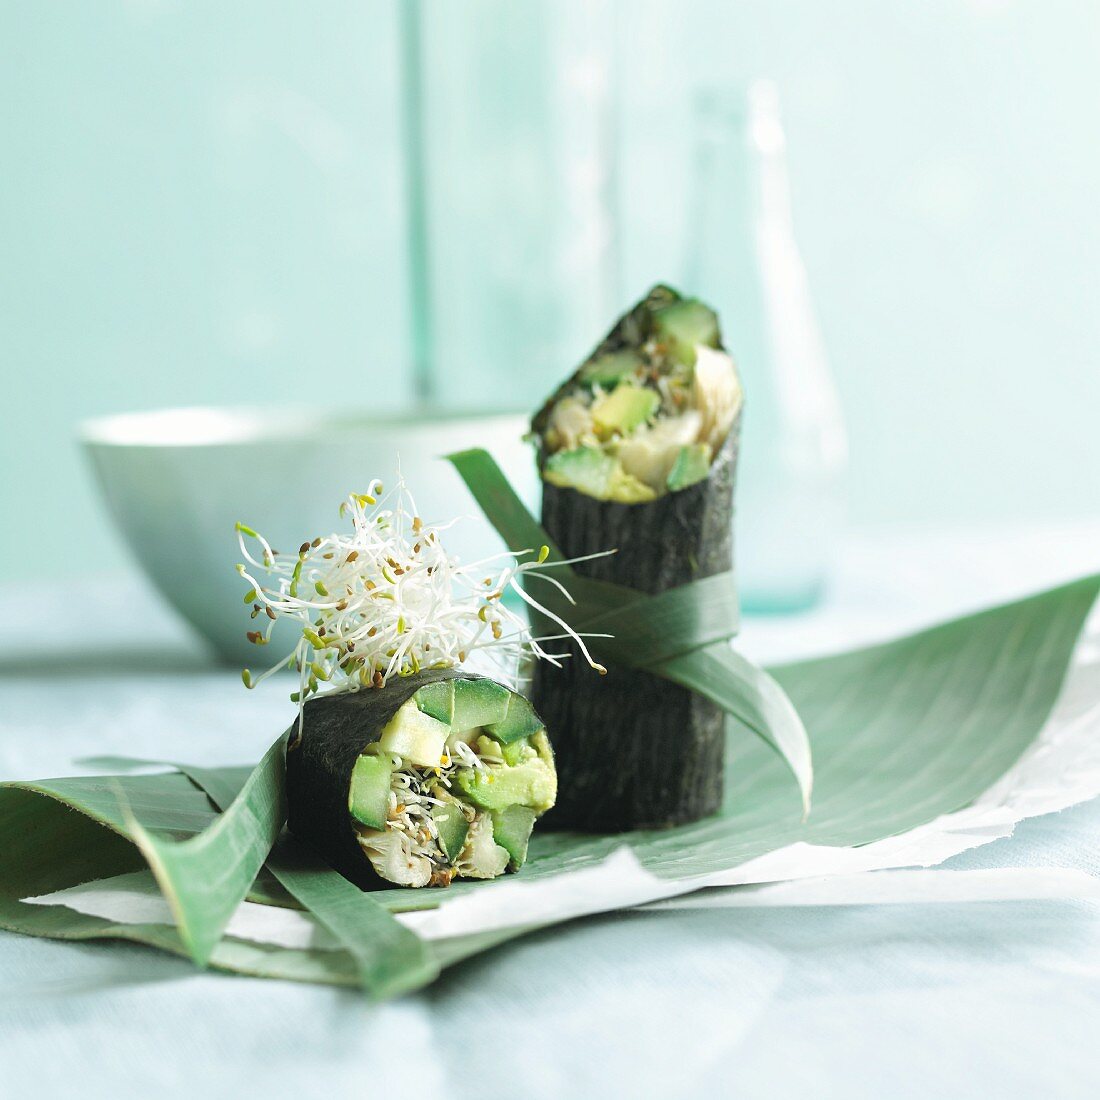 Spring rolls in nori leaves with avocado, cucumber and alfalfa sprouts